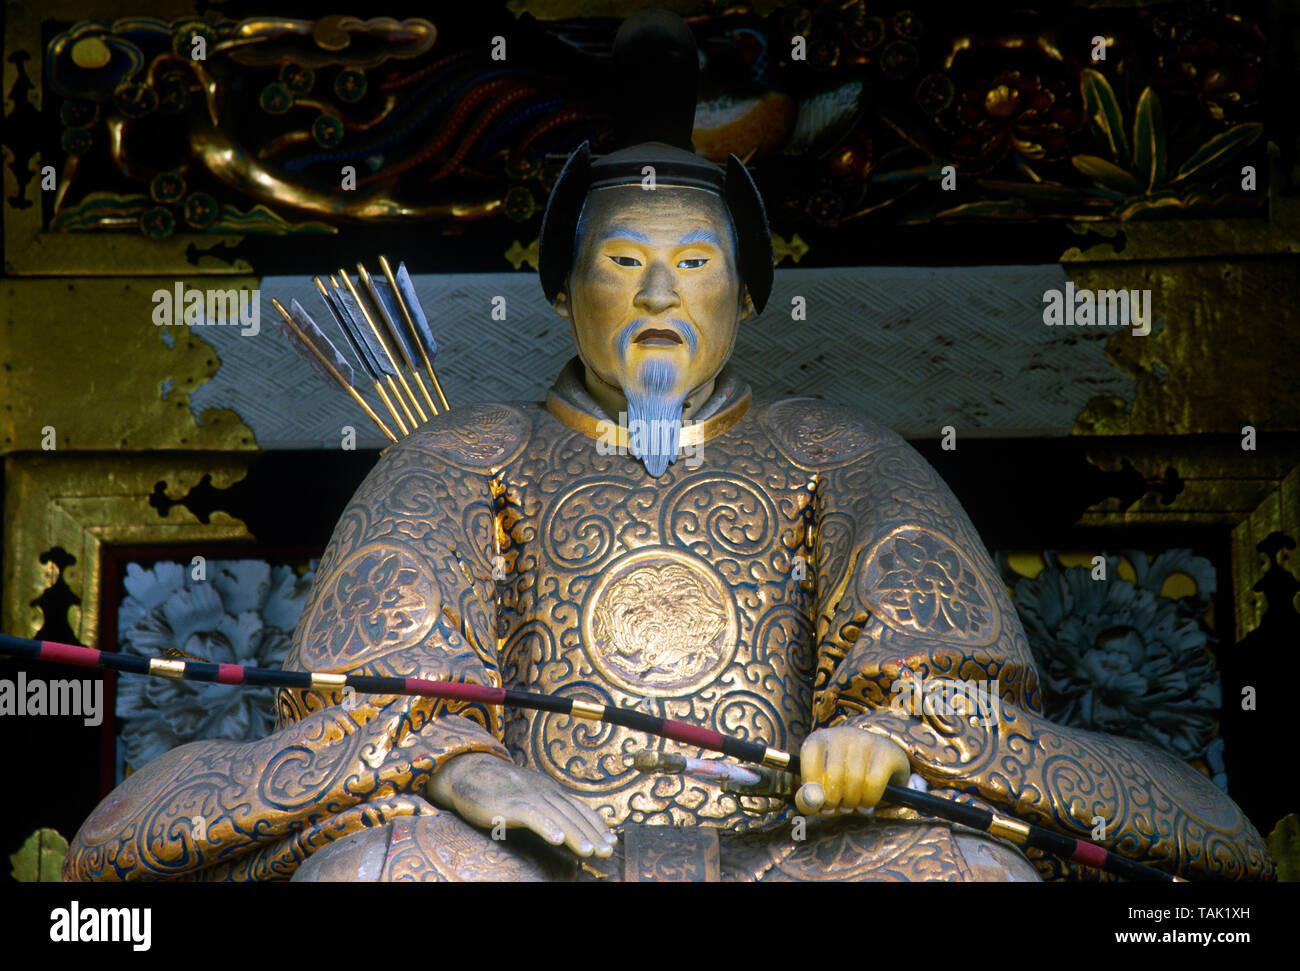 In Shinto, Zuijin are kami (god) warrior-guardians, often depicted as holding bows and arrows. Stock Photo